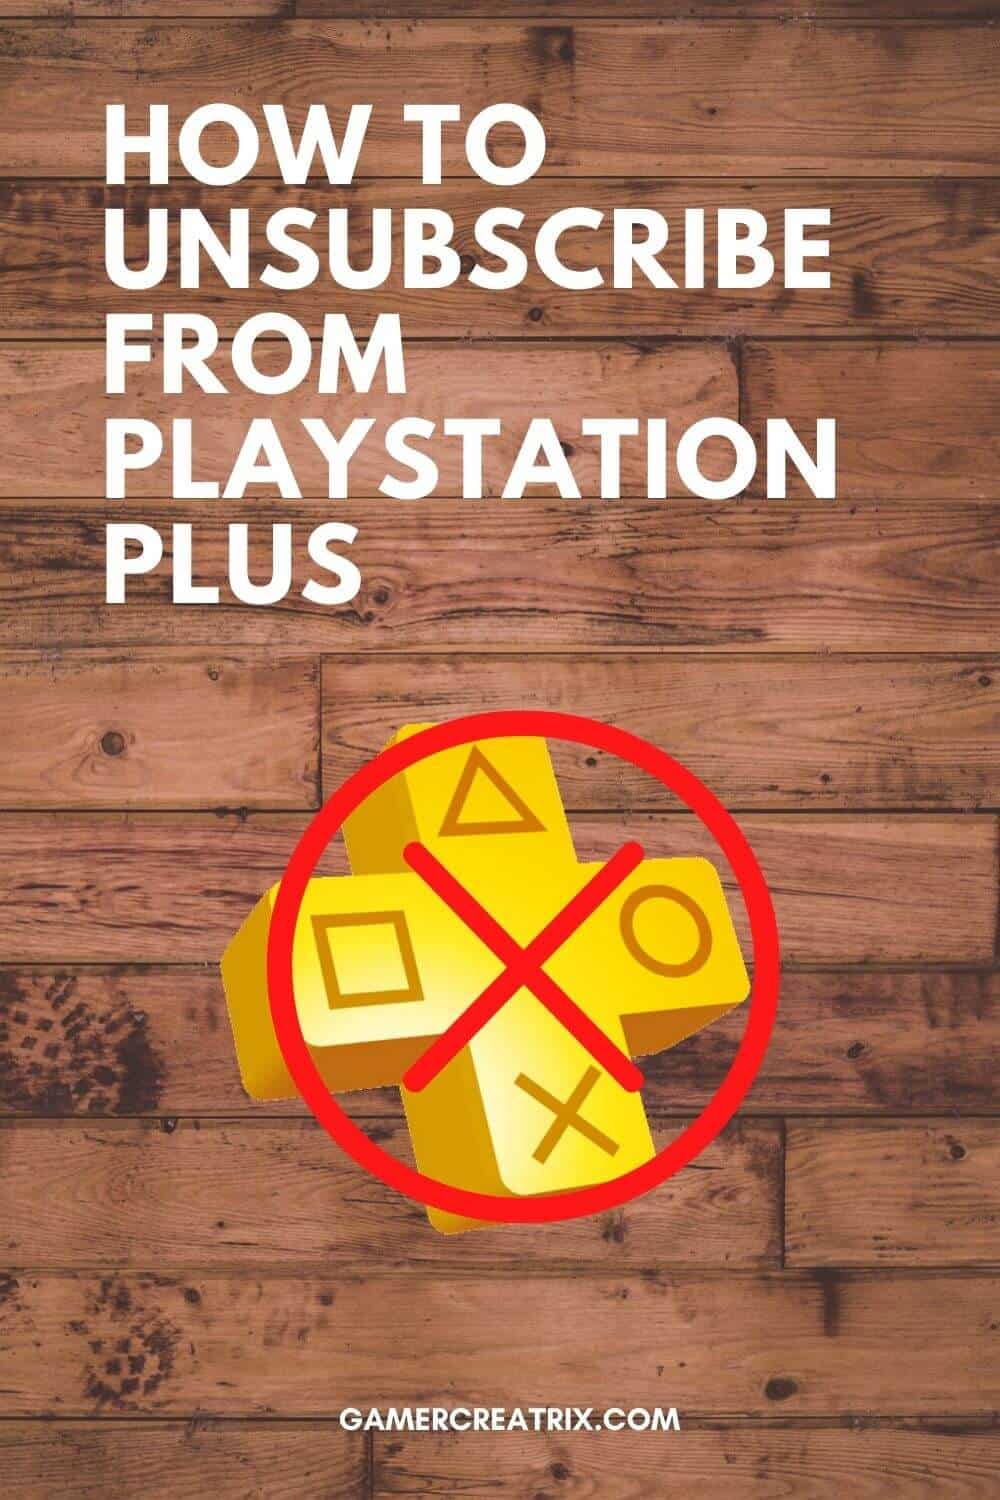 How To Unsubscribe From PlayStation Plus (With FAQs)